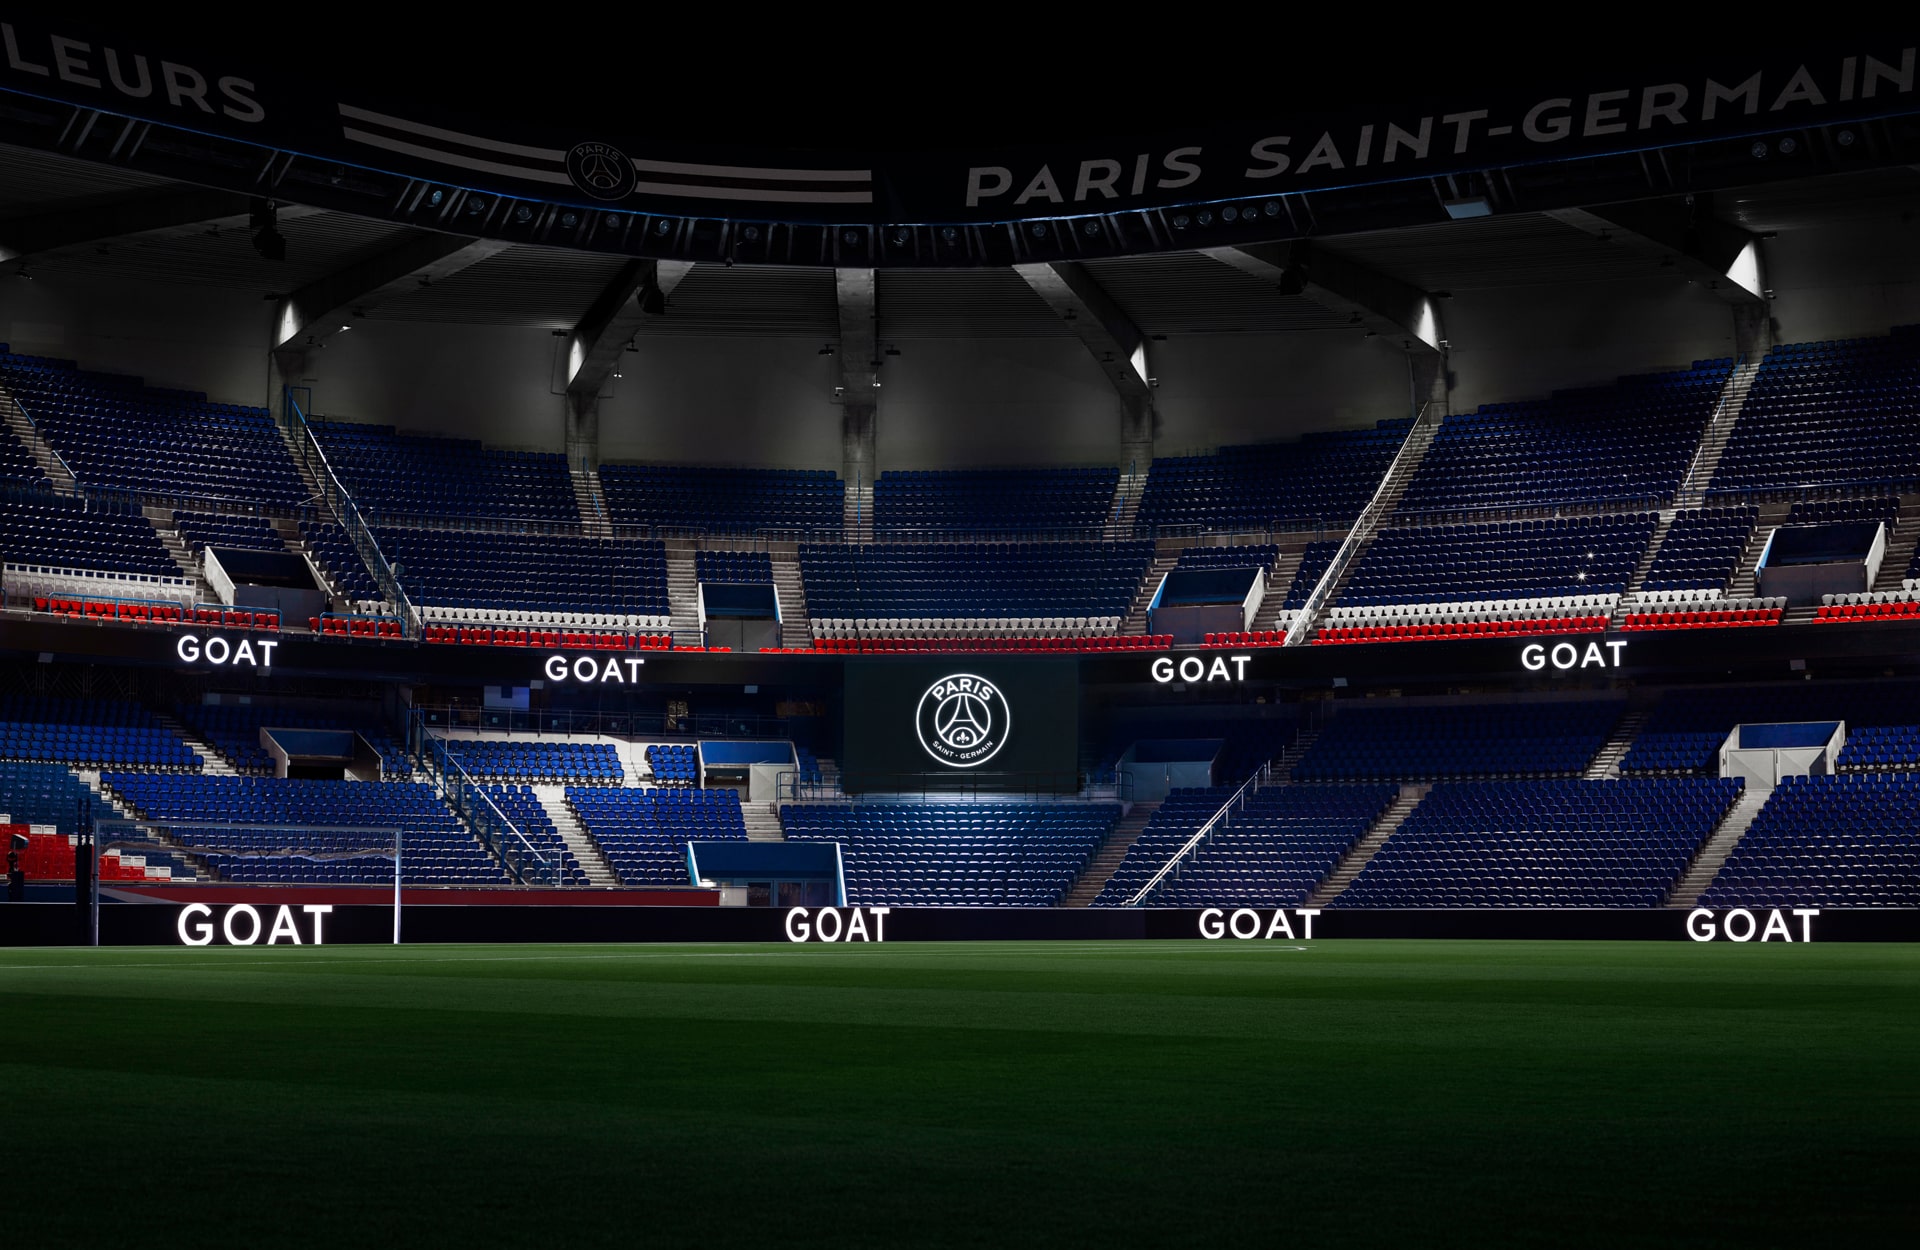 Paris Saint-Germain: Lionel Messi to wear 'GOAT' on his sleeve, PSG announce Partnership with GOAT as new 'Sleeve Sponsor' worth €50-million - Check details